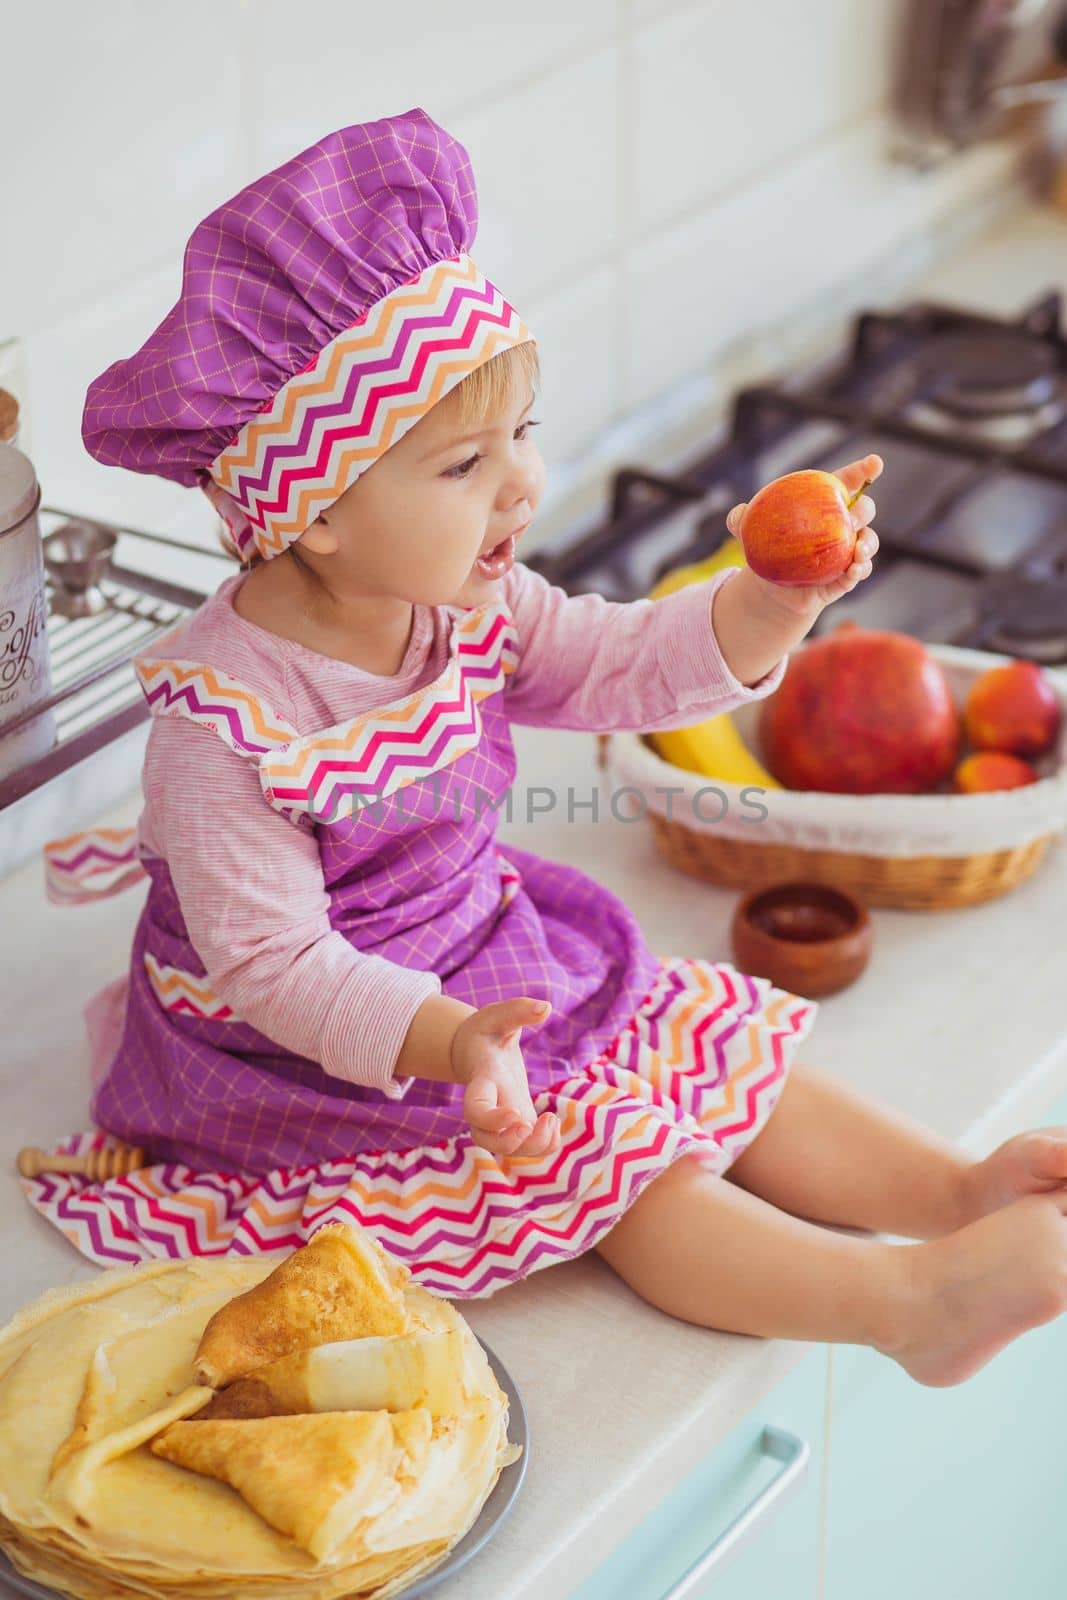 Adorable baby in an apron and chef's cap sitting with an apple on the table.